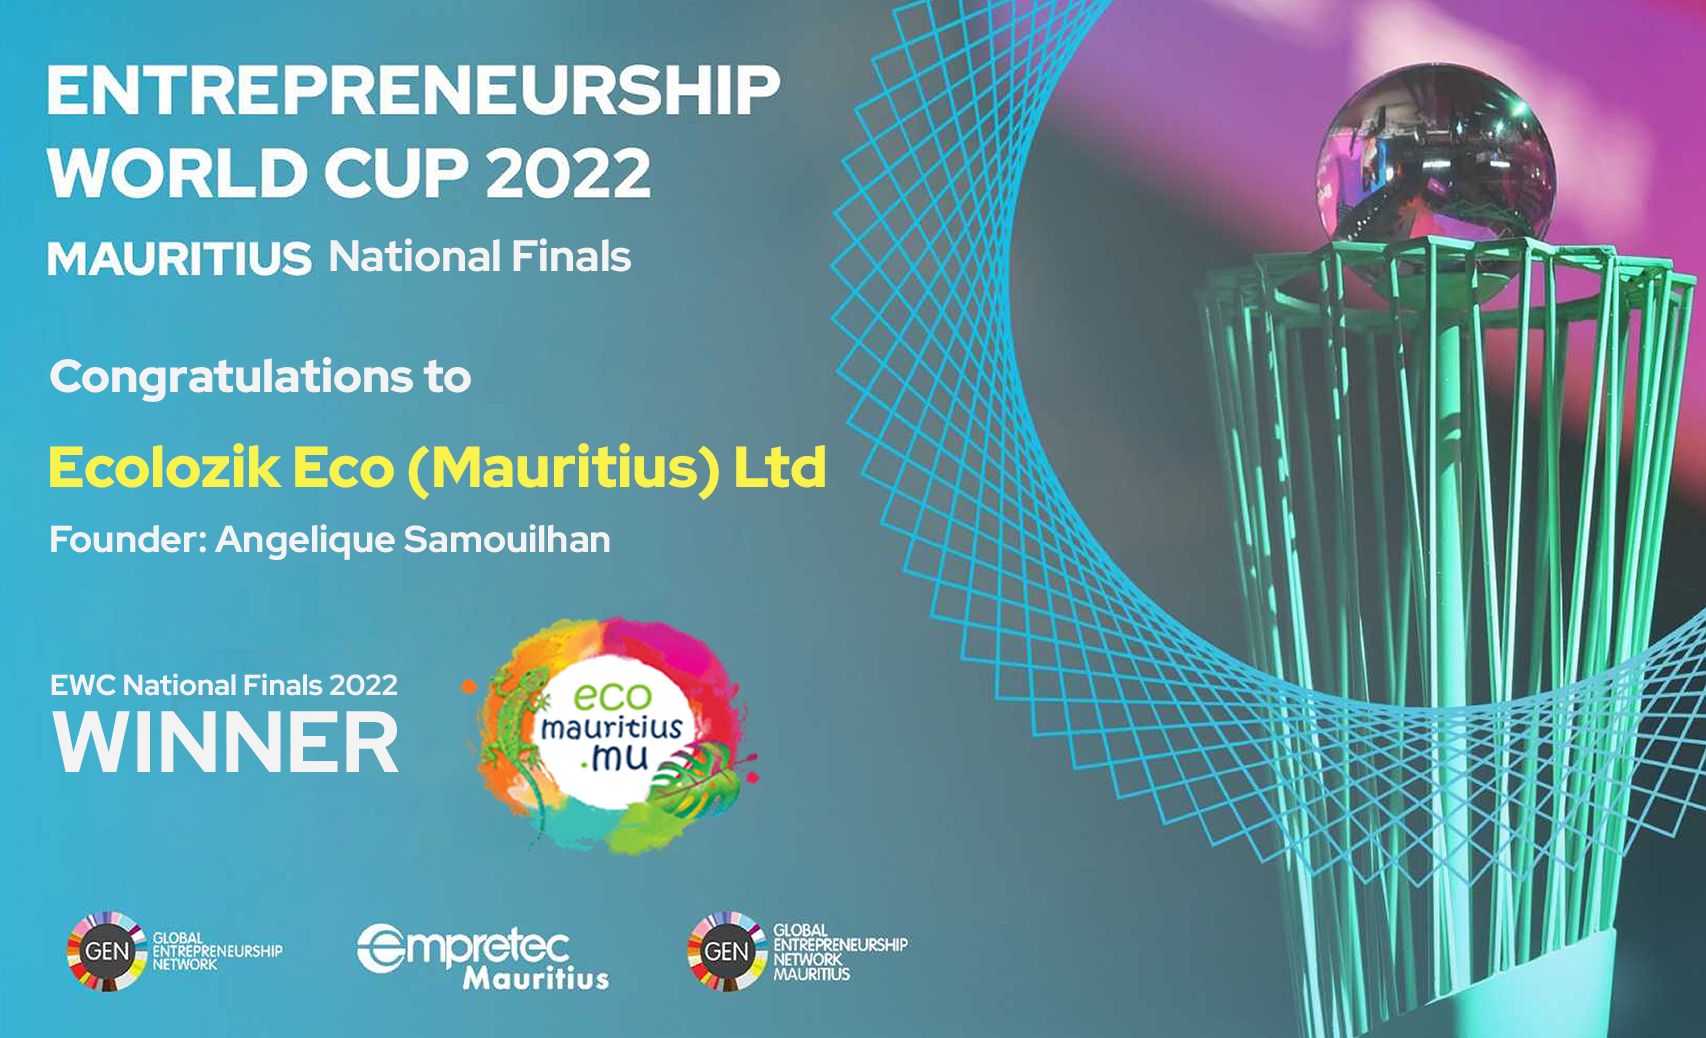 EcoMauritius: National Winner for the Entrepreneurship World Cup 2022.